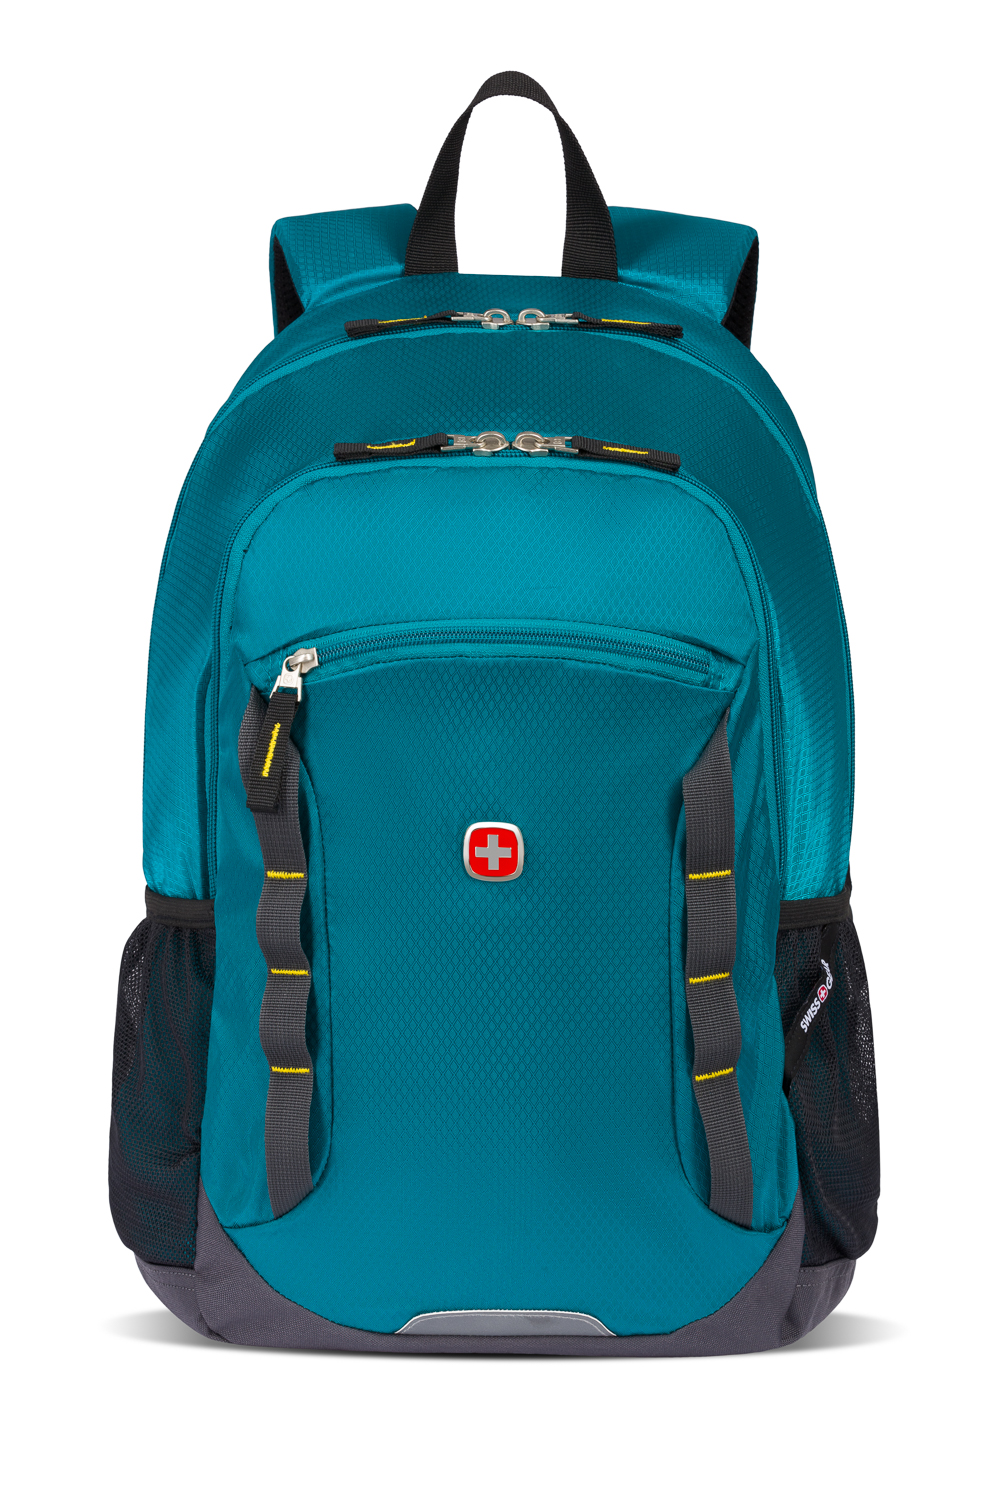 Swissgear 3795 Backpack - Turquoise Gray